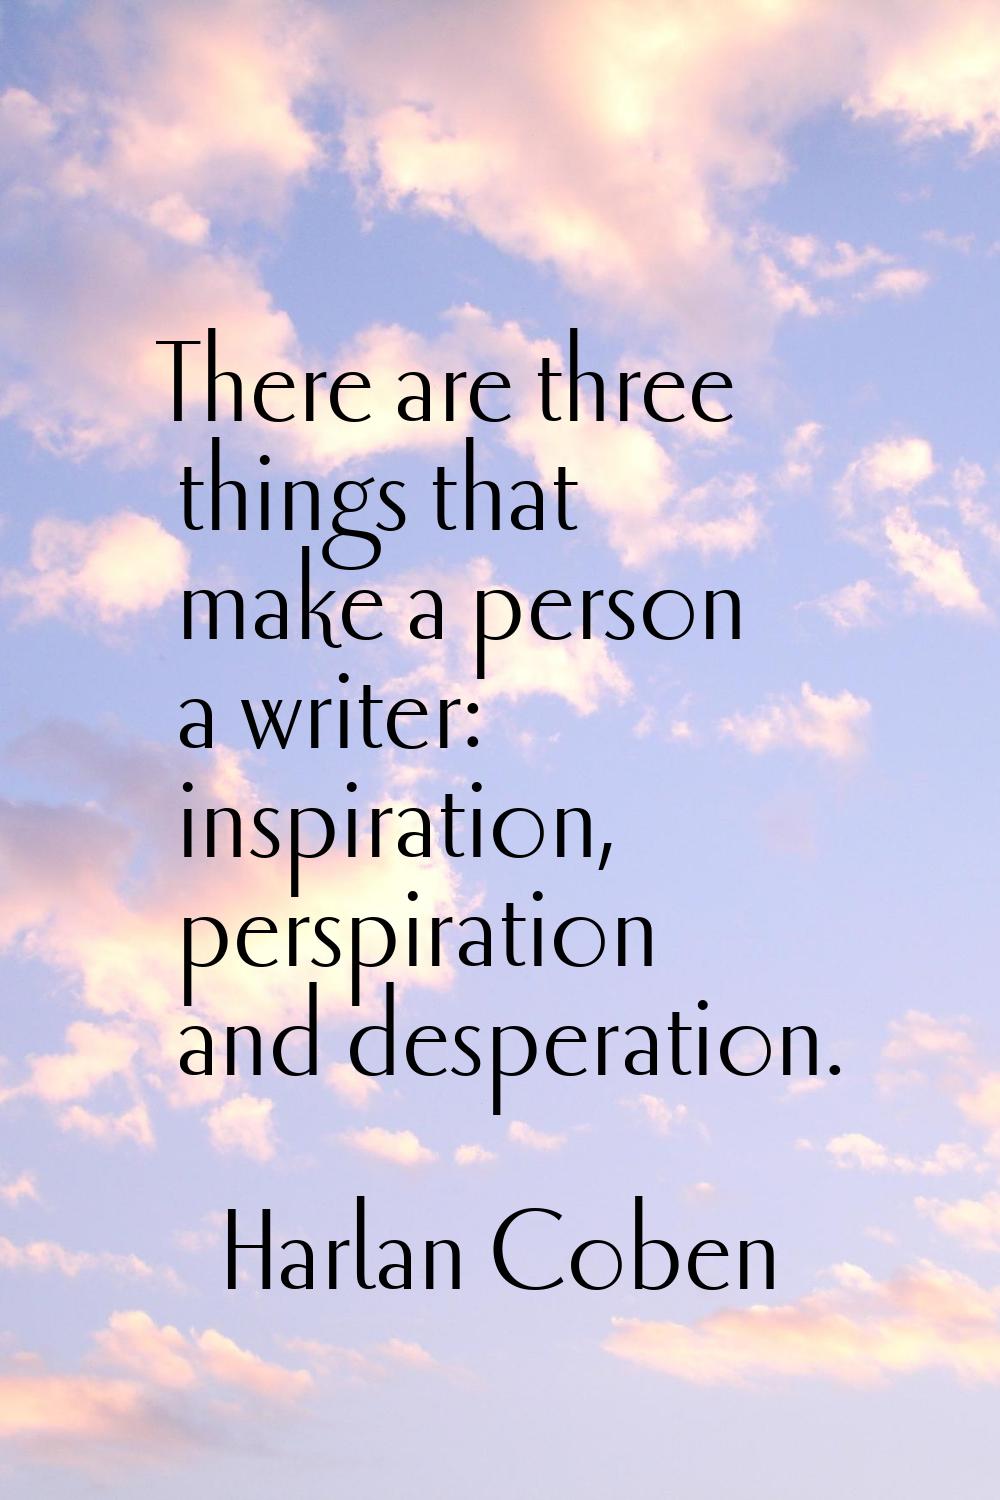 There are three things that make a person a writer: inspiration, perspiration and desperation.